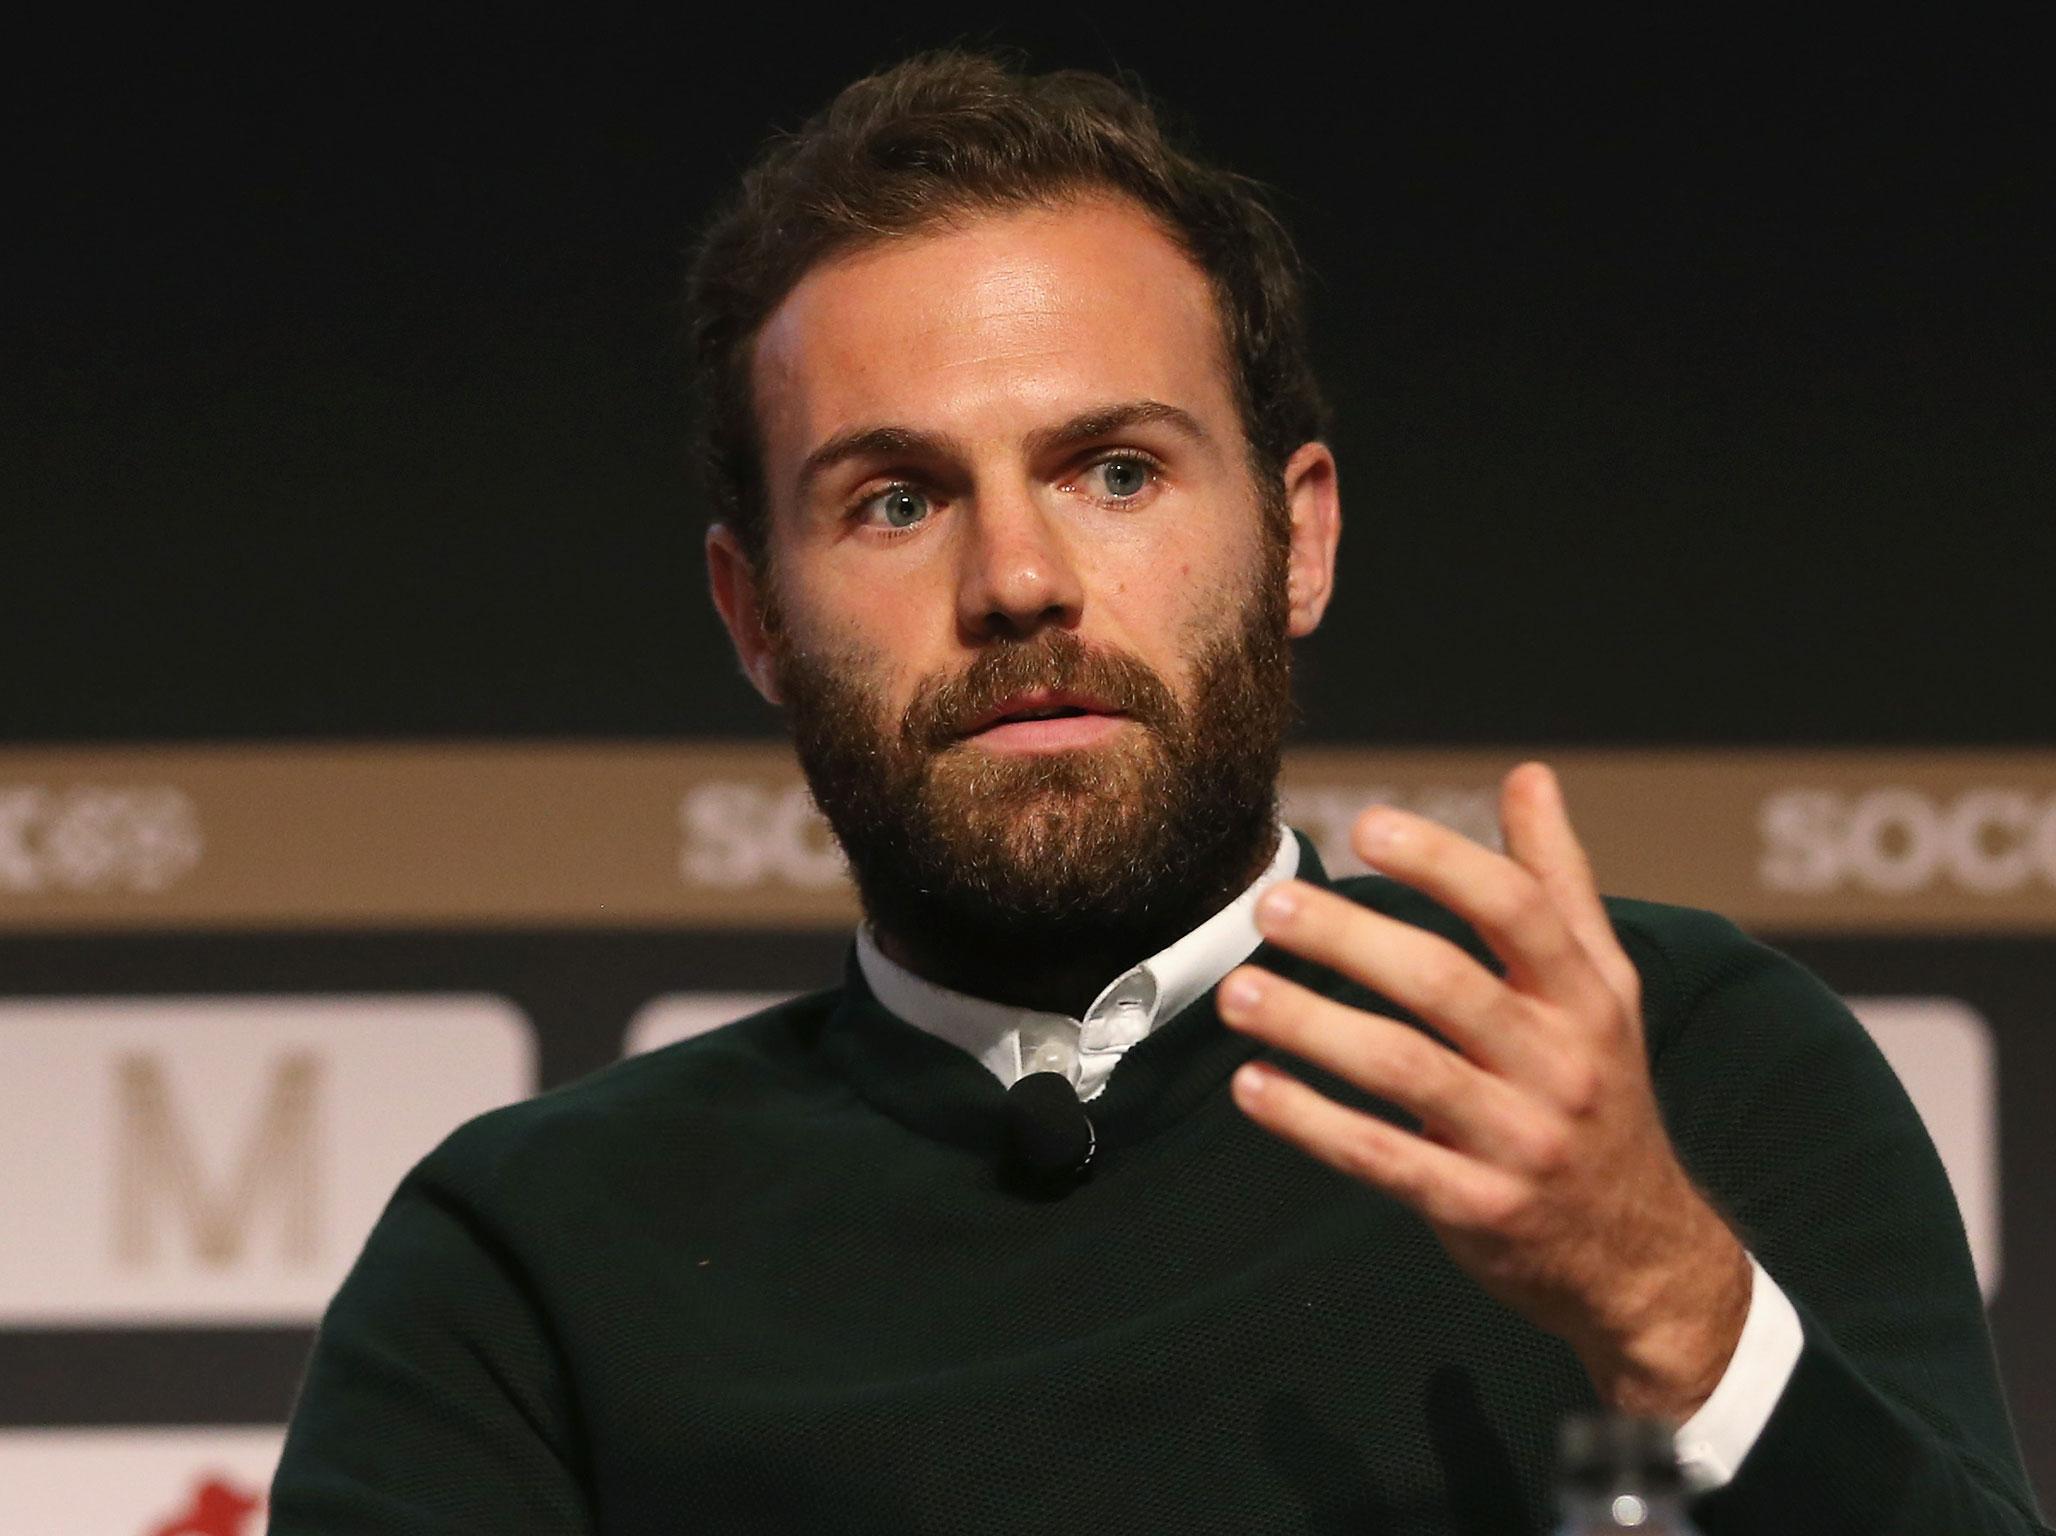 Juan Mata's project calls on those in football to donate 1% of their salary to charity